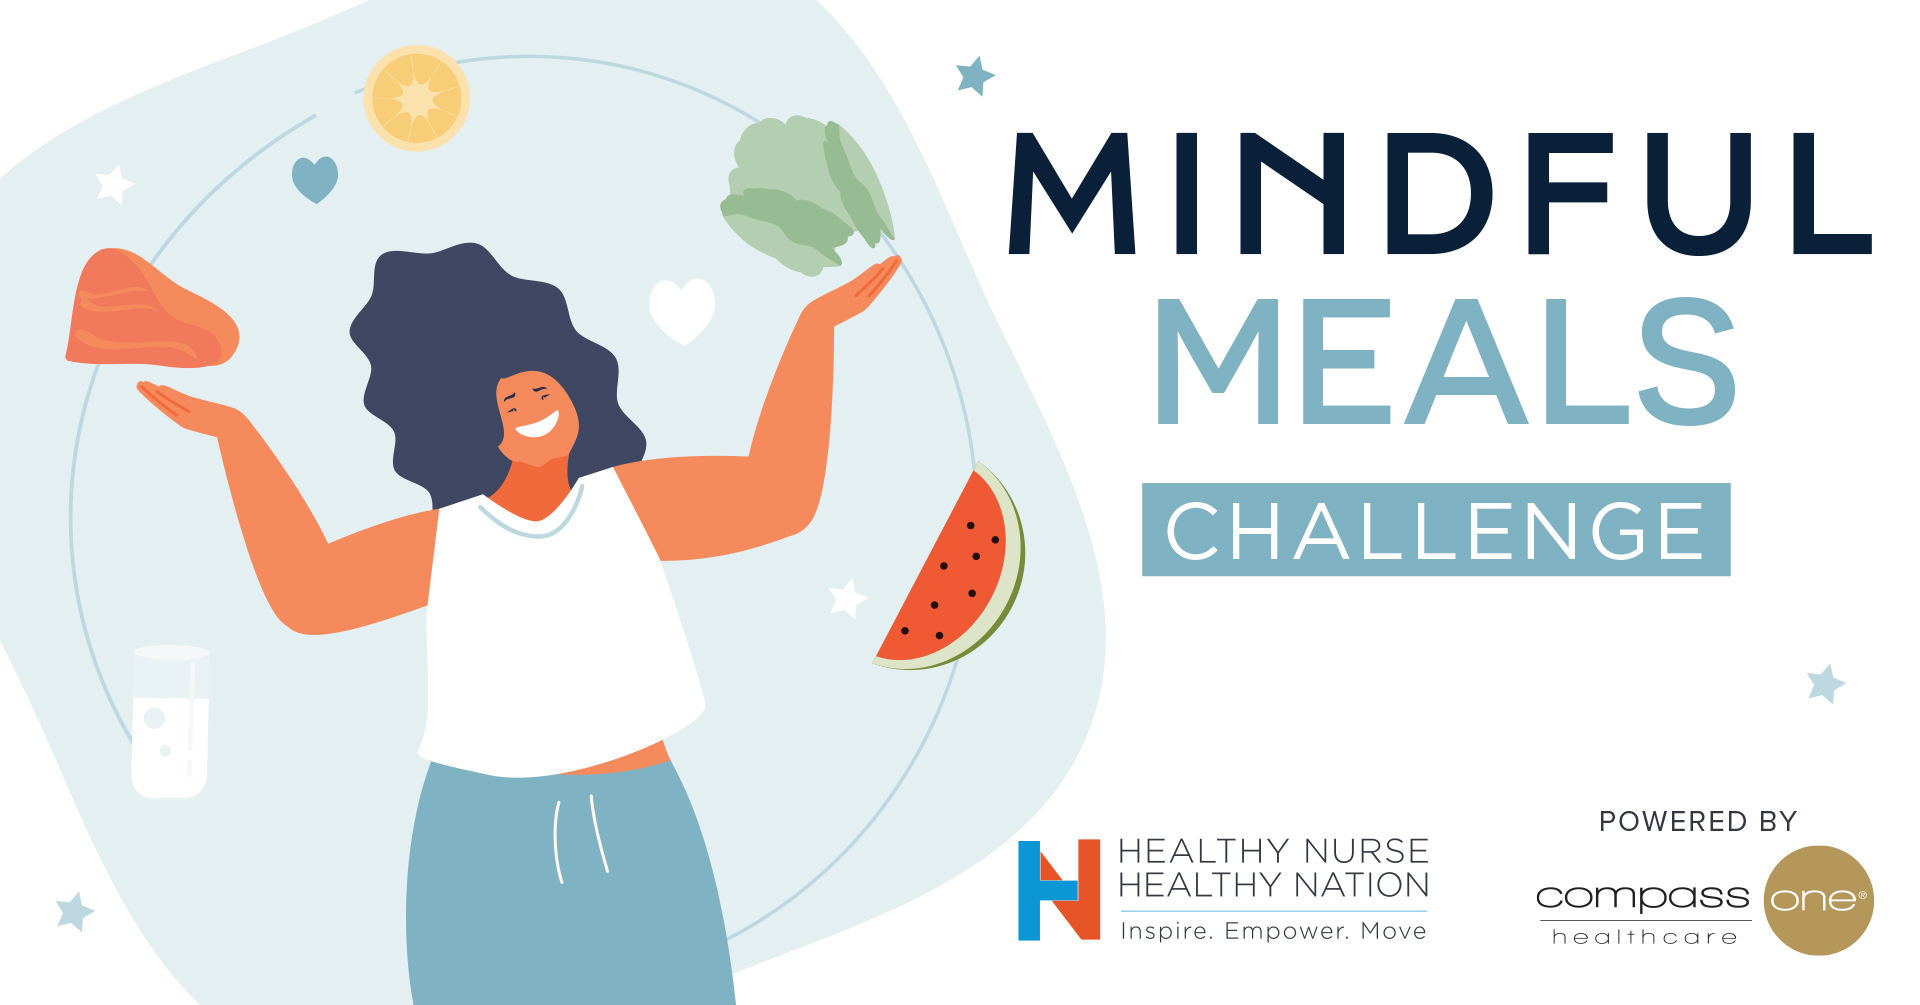 Mindful Meals, powered by Morrison Healthcare, a Division of Compass One Healthcare 90